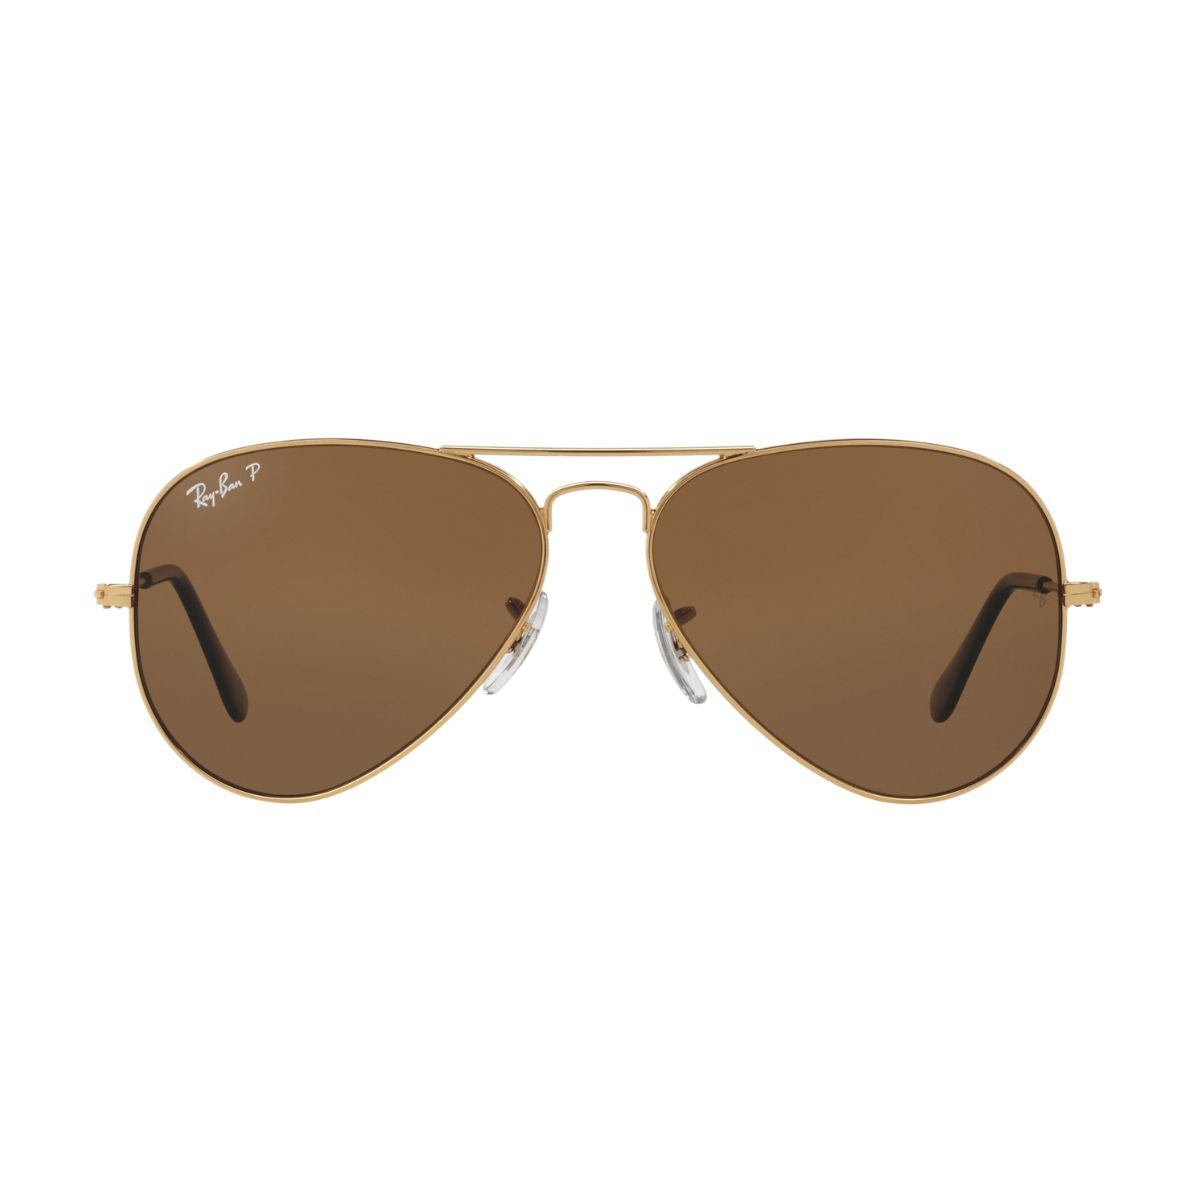 "Buy Online Ray Ban 3025 001/57 Polarized Sunglass For Men And Women At Optorium"